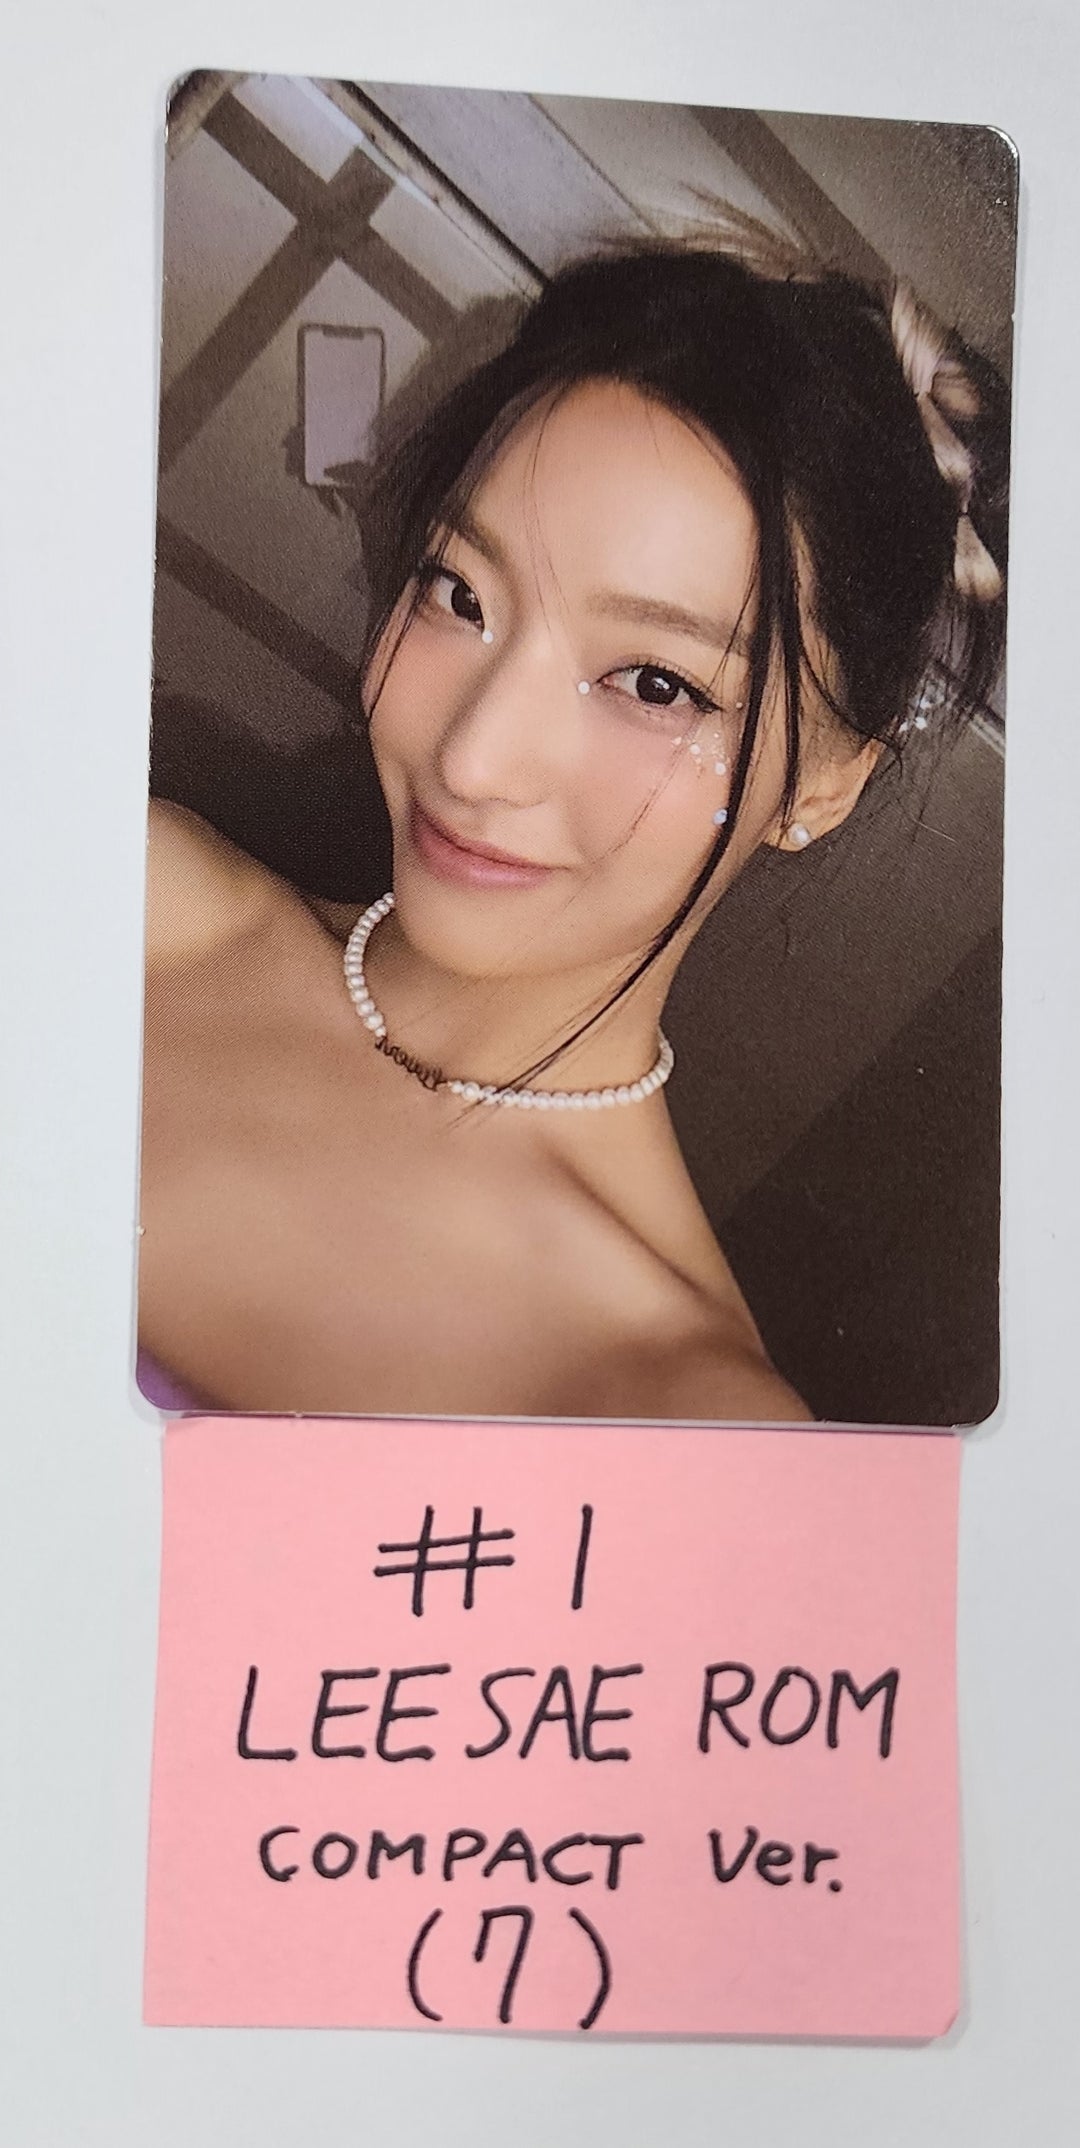 Fromis_9 "Unlock My World" - Official Photocard [Compact Ver.]